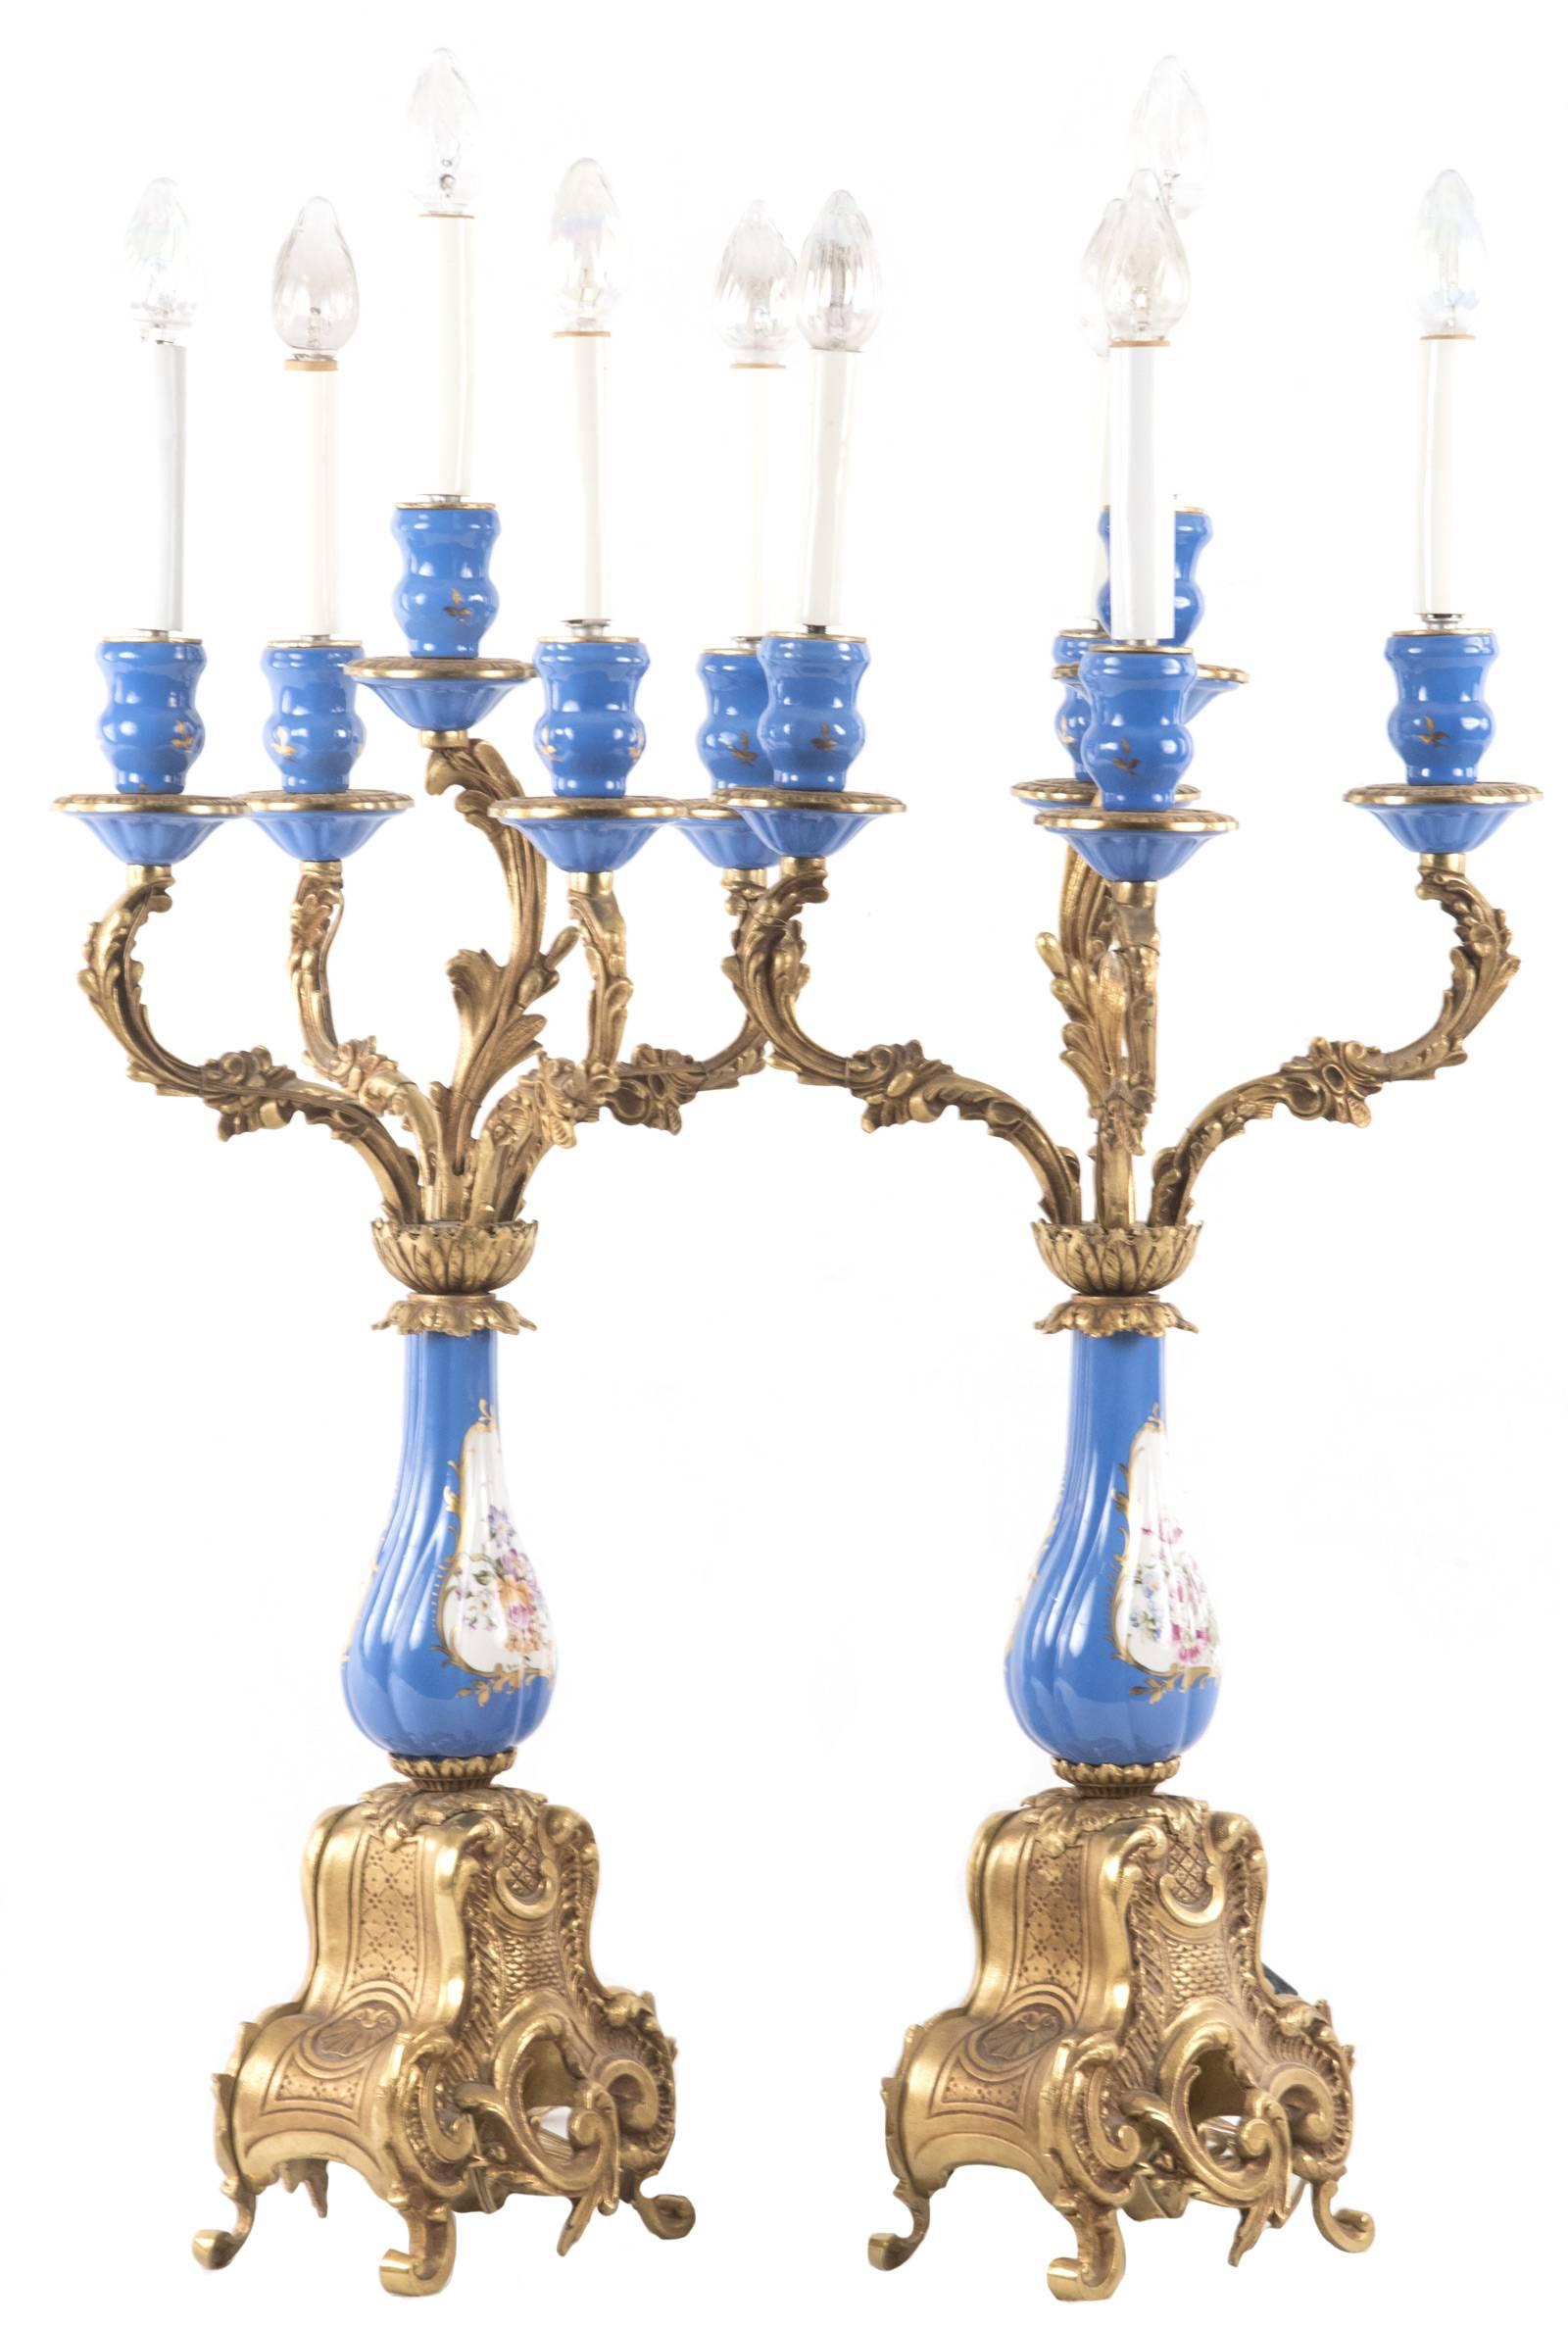 Light blue sevres style porcelain and ormolu-mounted five-light candelabra. The electrified candle-shaped lights are supported in shaped sconces, the tapering drip pans supported on scrolling filigree arms that meet at a stylized collar above a